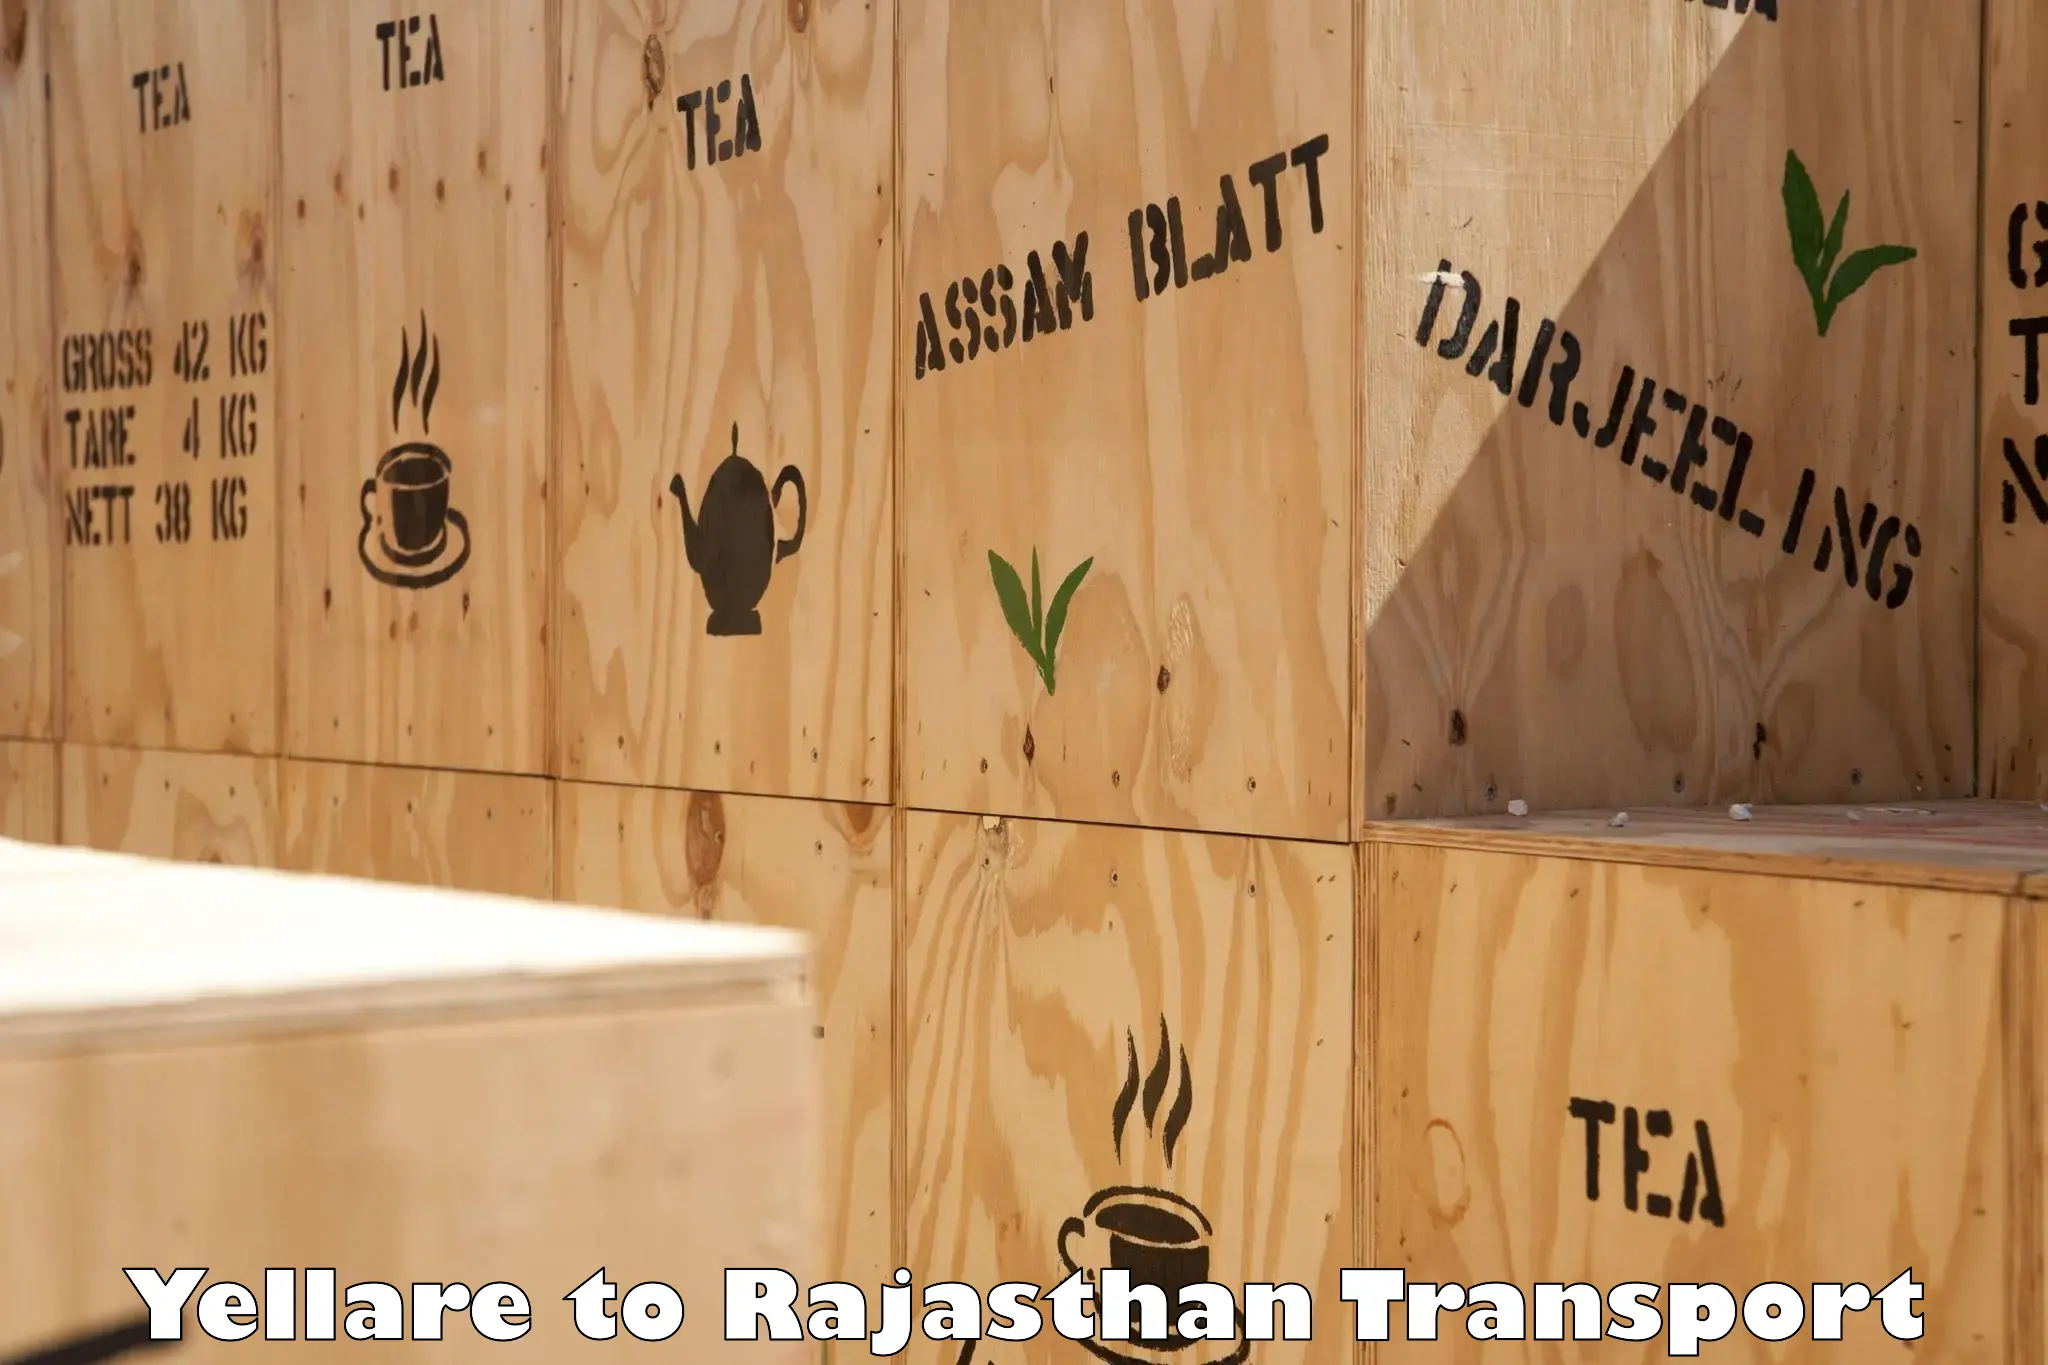 Part load transport service in India Yellare to Rajasthan